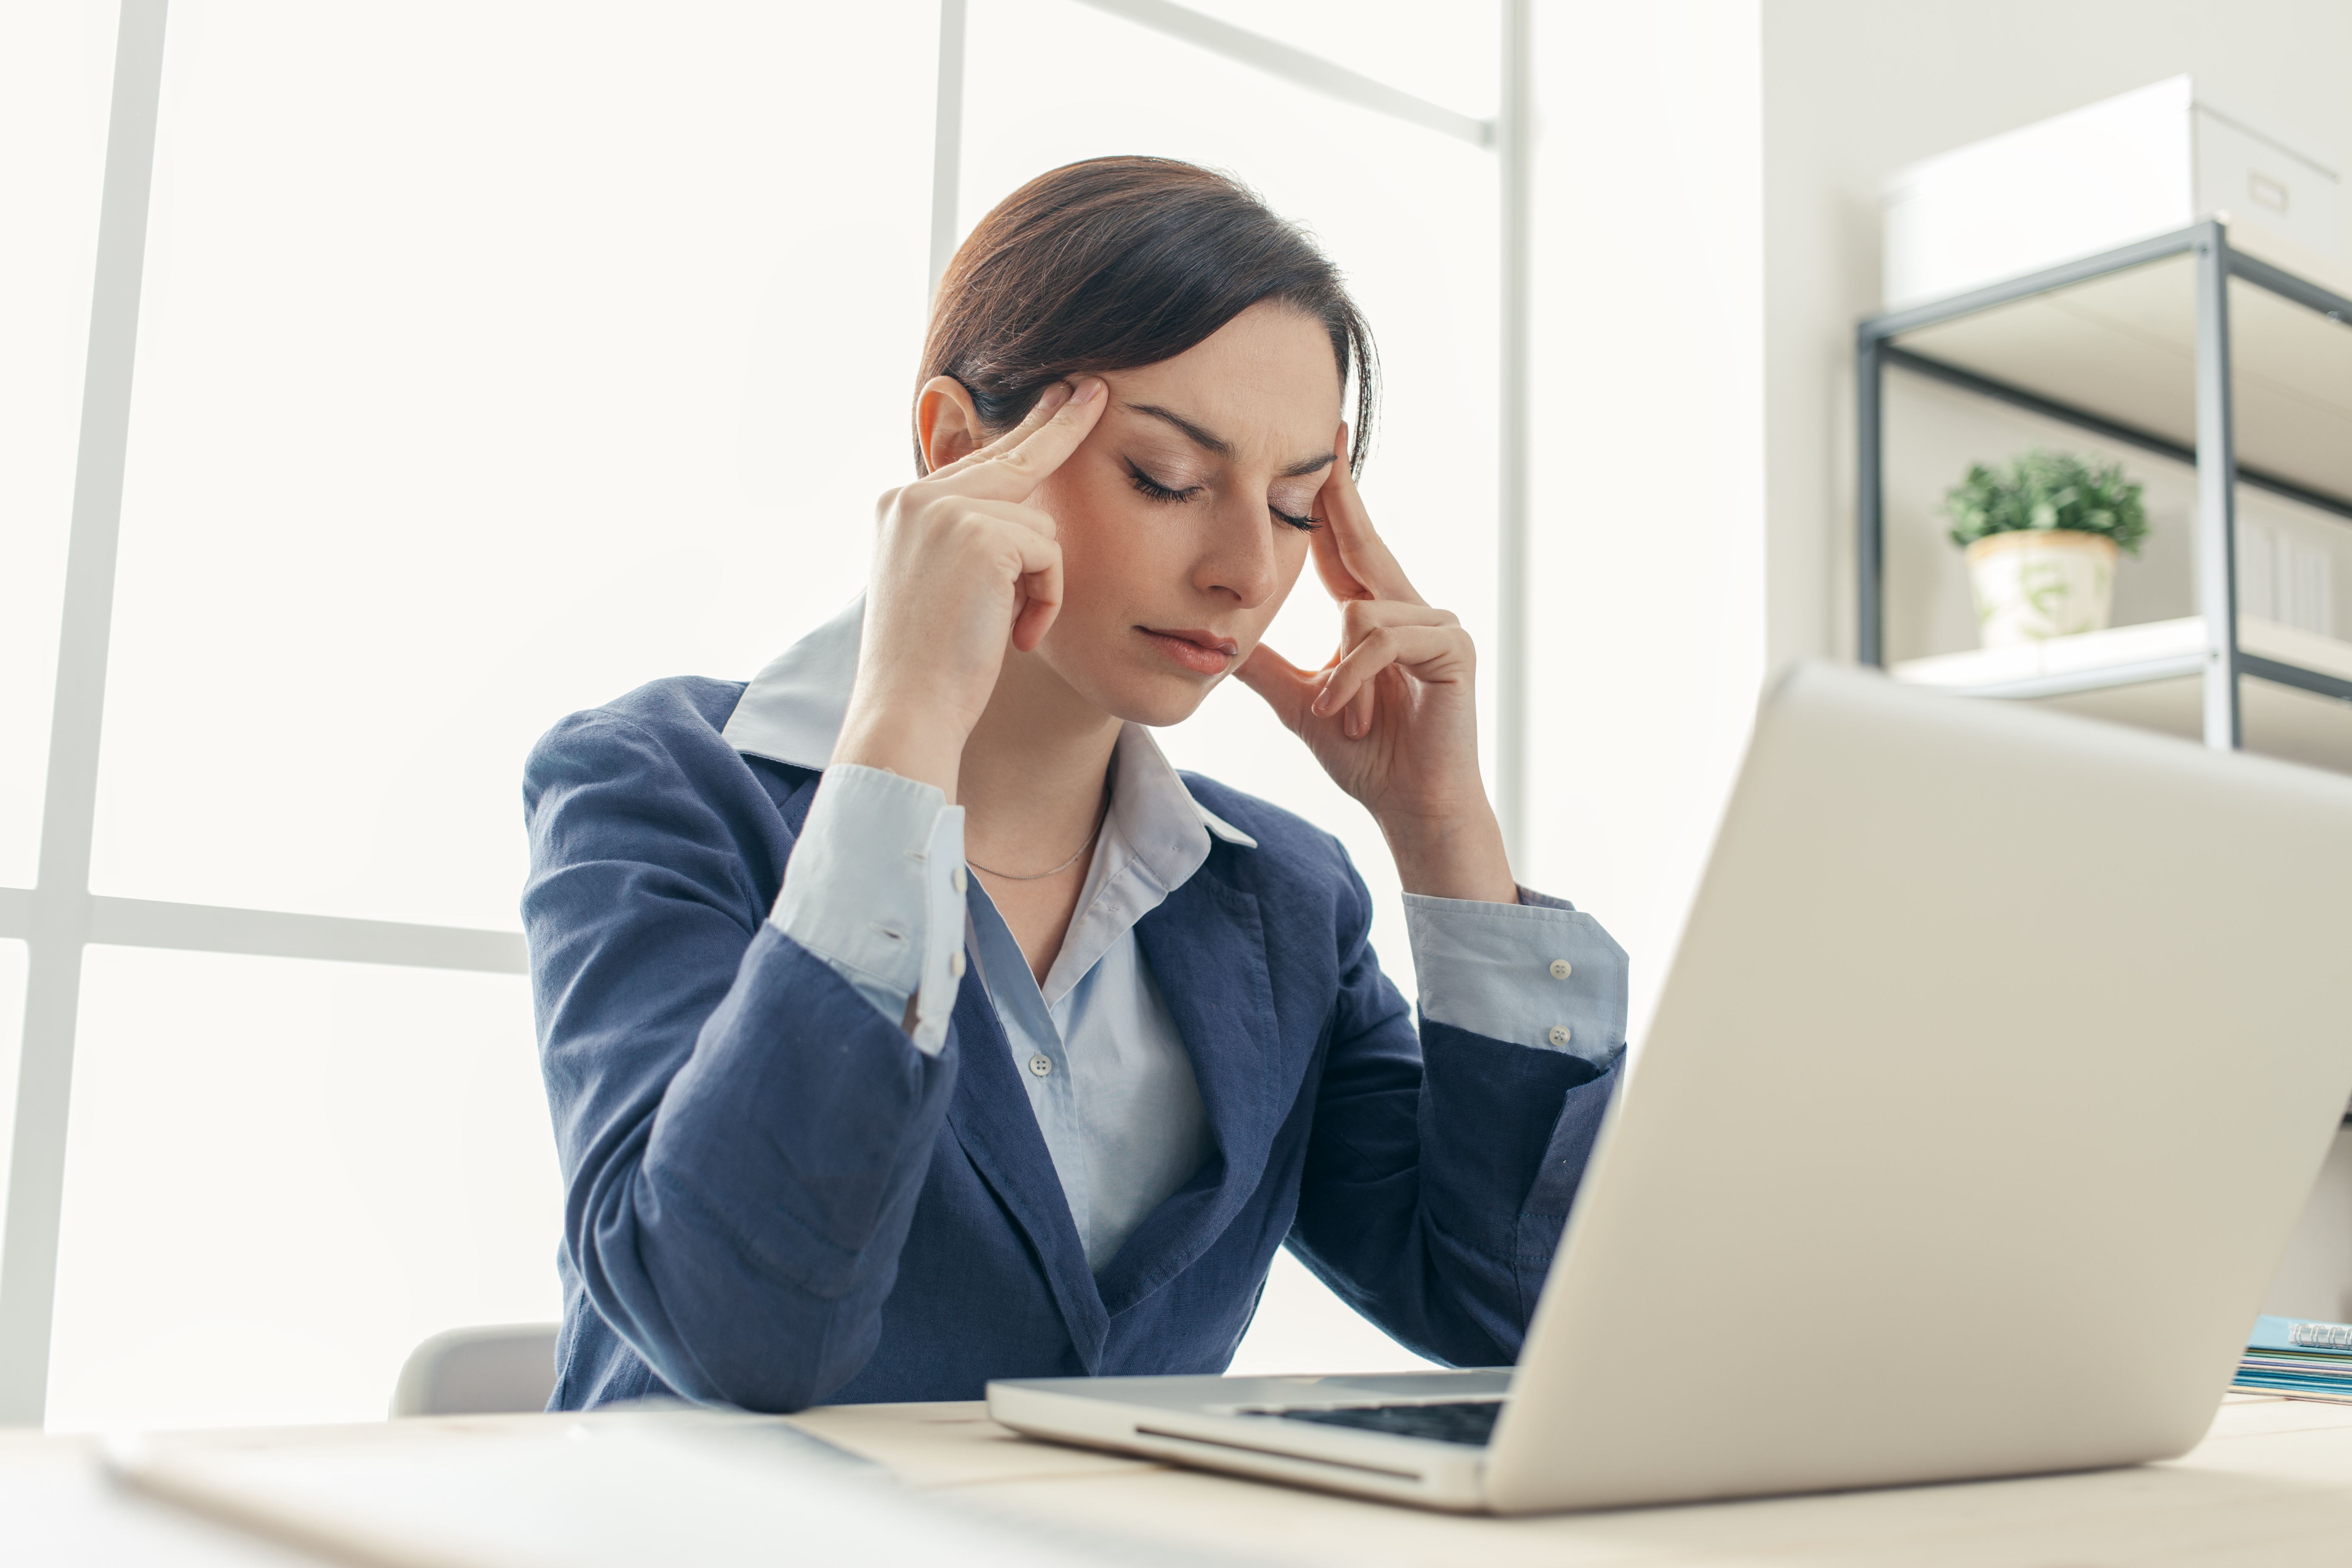 Exhausted businesswoman at work | Star Wellness